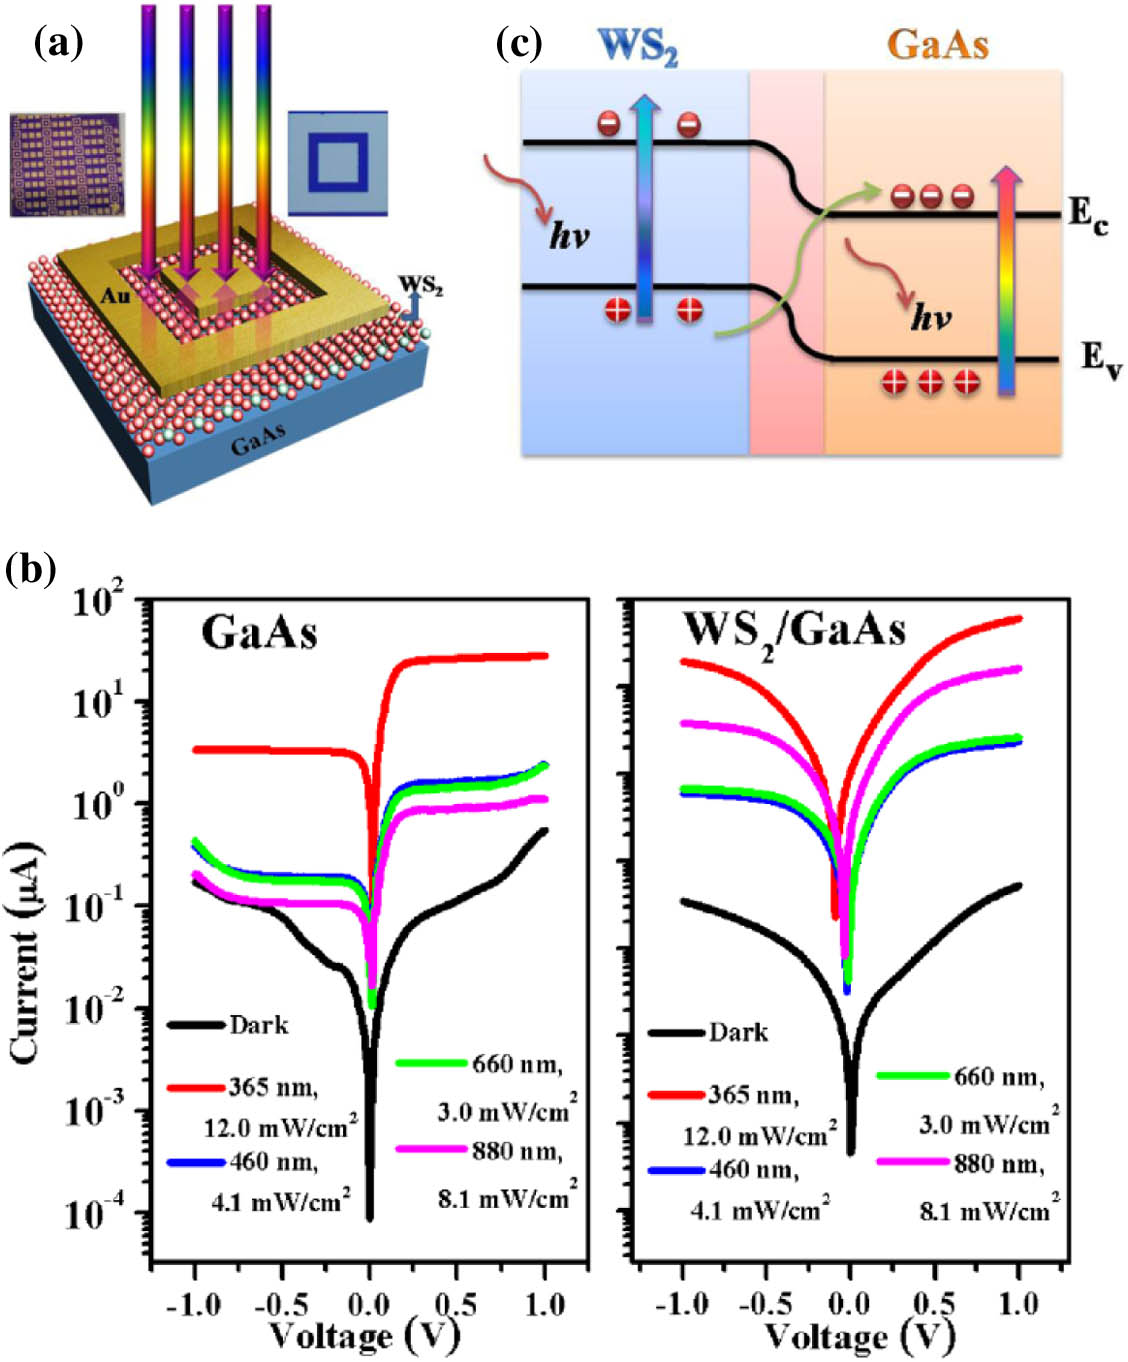 (a) Schematic structure of the WS2/GaAs photodetector, and the insets are the optical microscopy images of the device arrays (left) and single device (right). (b) Dark and light I–V curves of the GaAs photodetector (left) and WS2/GaAs photodetector (right) under different wavelength light illumination (365 nm, 460 nm, 660 nm, and 880 nm). (c) Schematic band diagrams at the interface of the WS2/GaAs heterojunction.